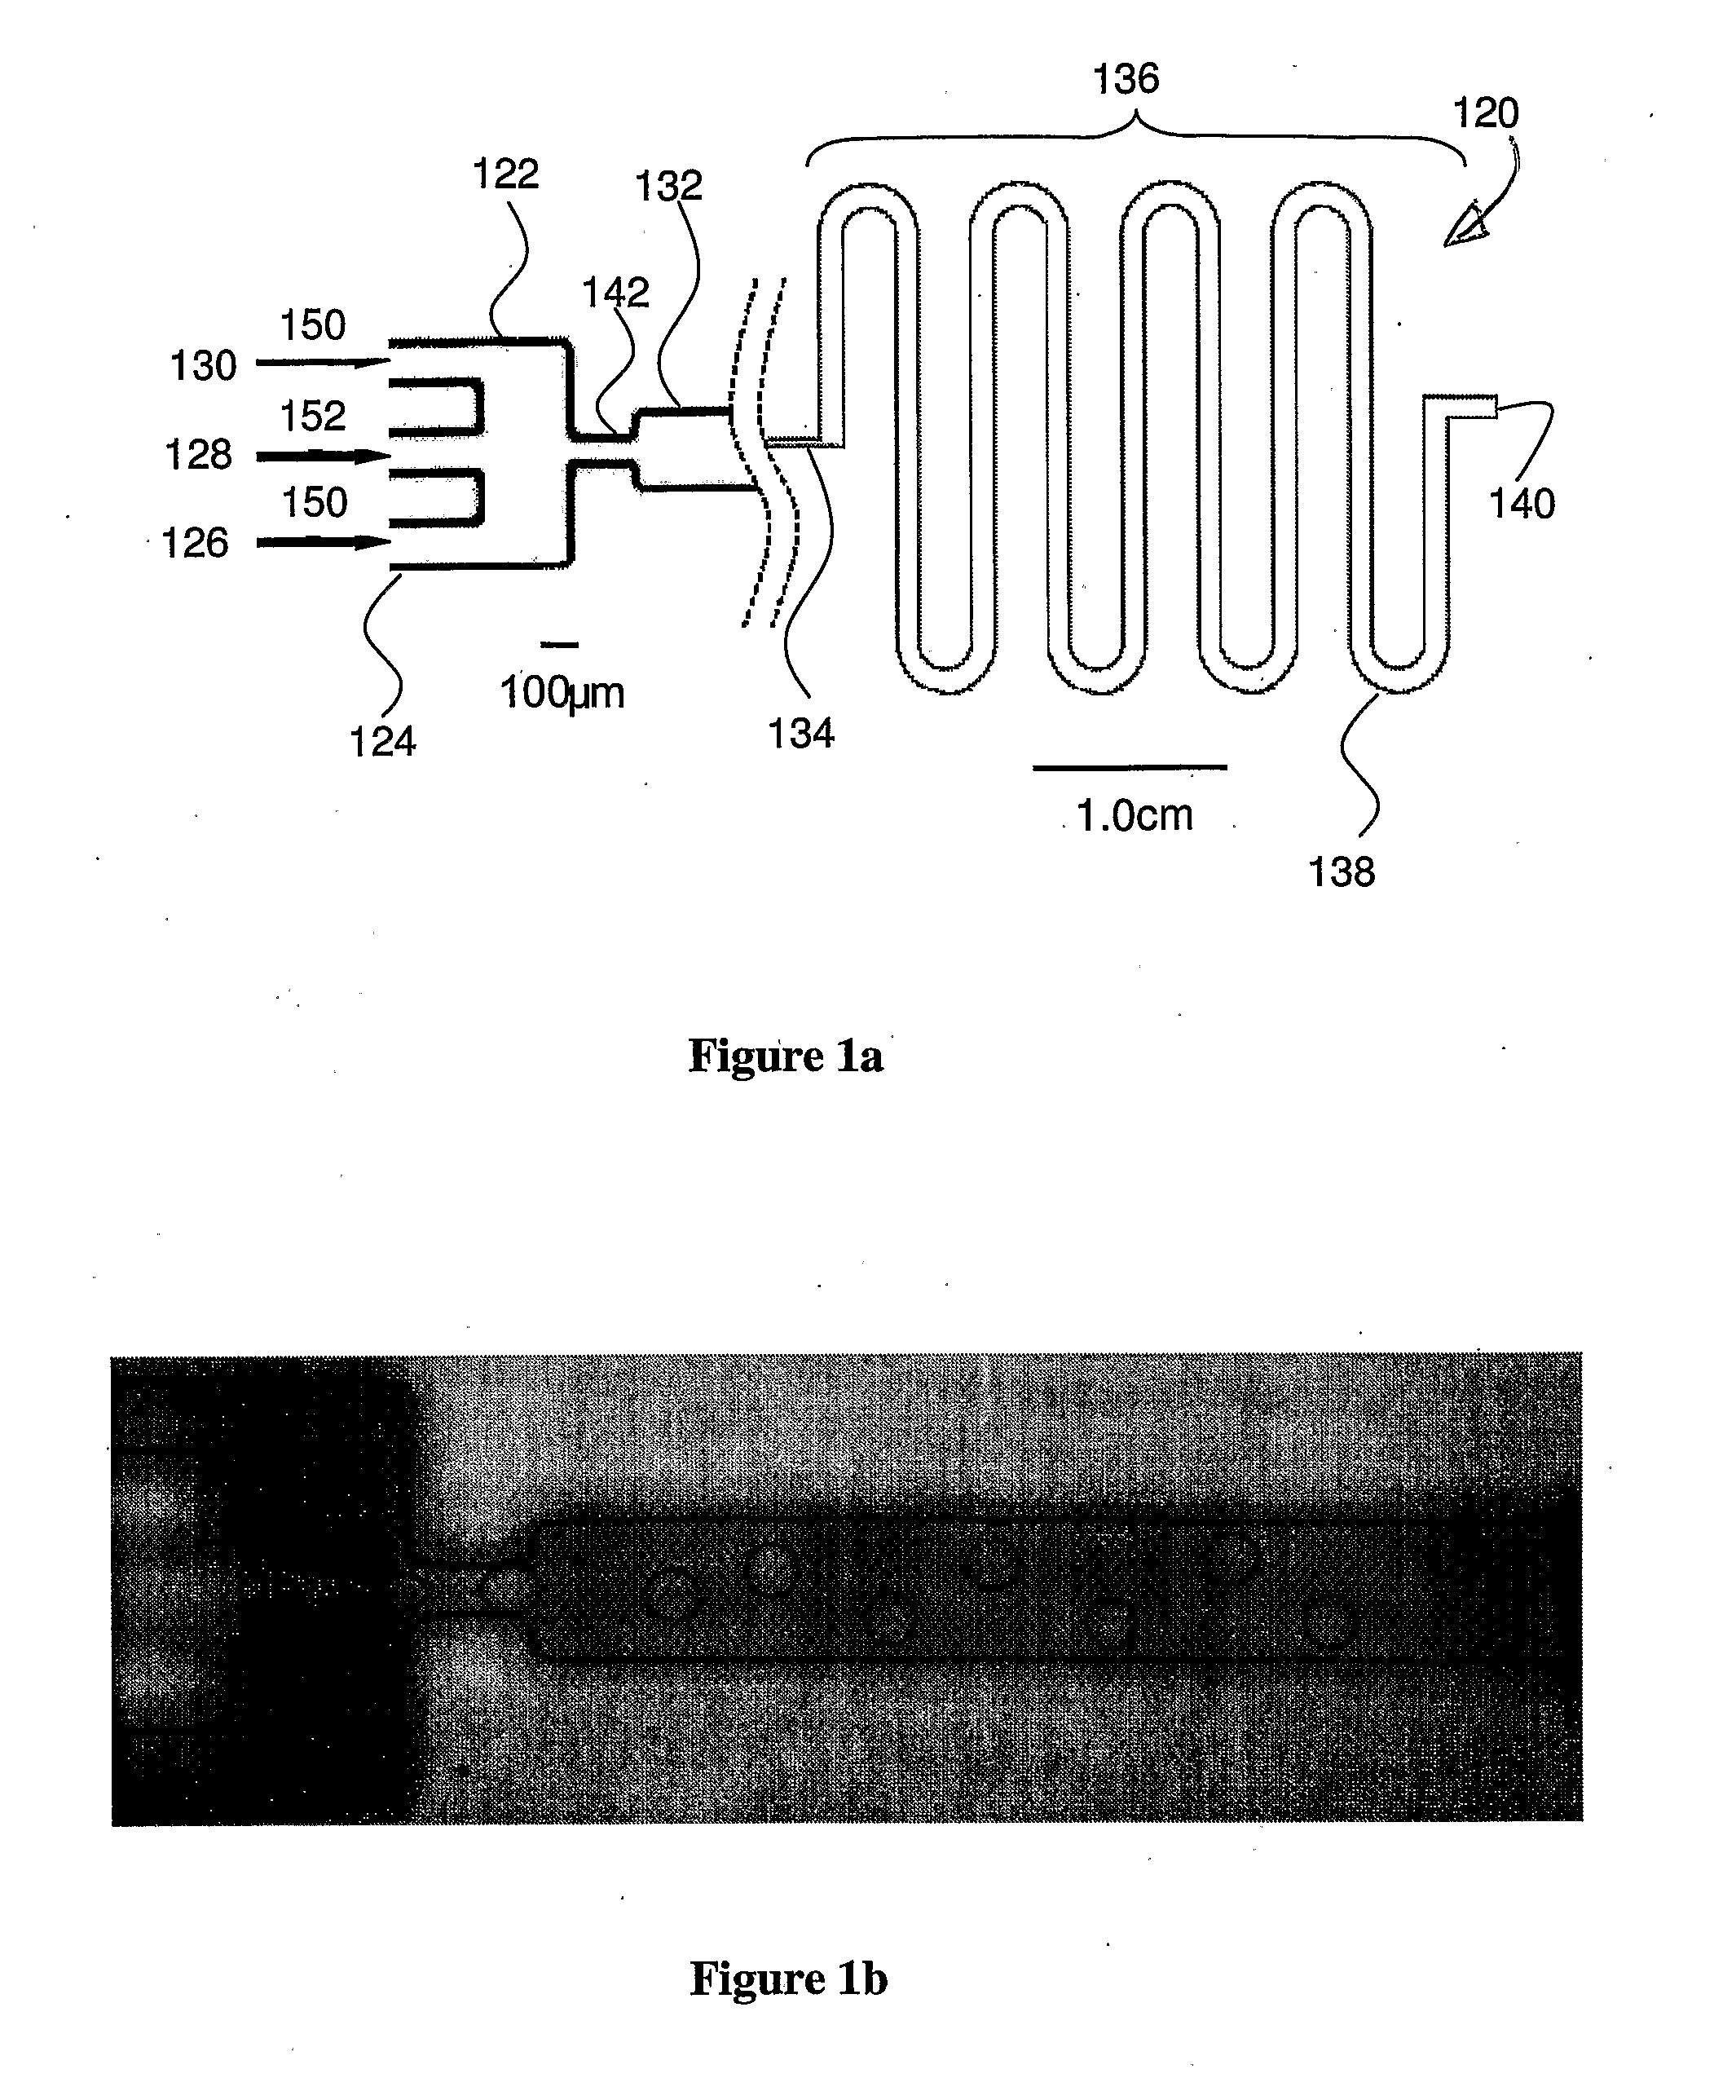 Method of Producing Polymeric Particles With Selected Size, Shape, Morphology and Composition